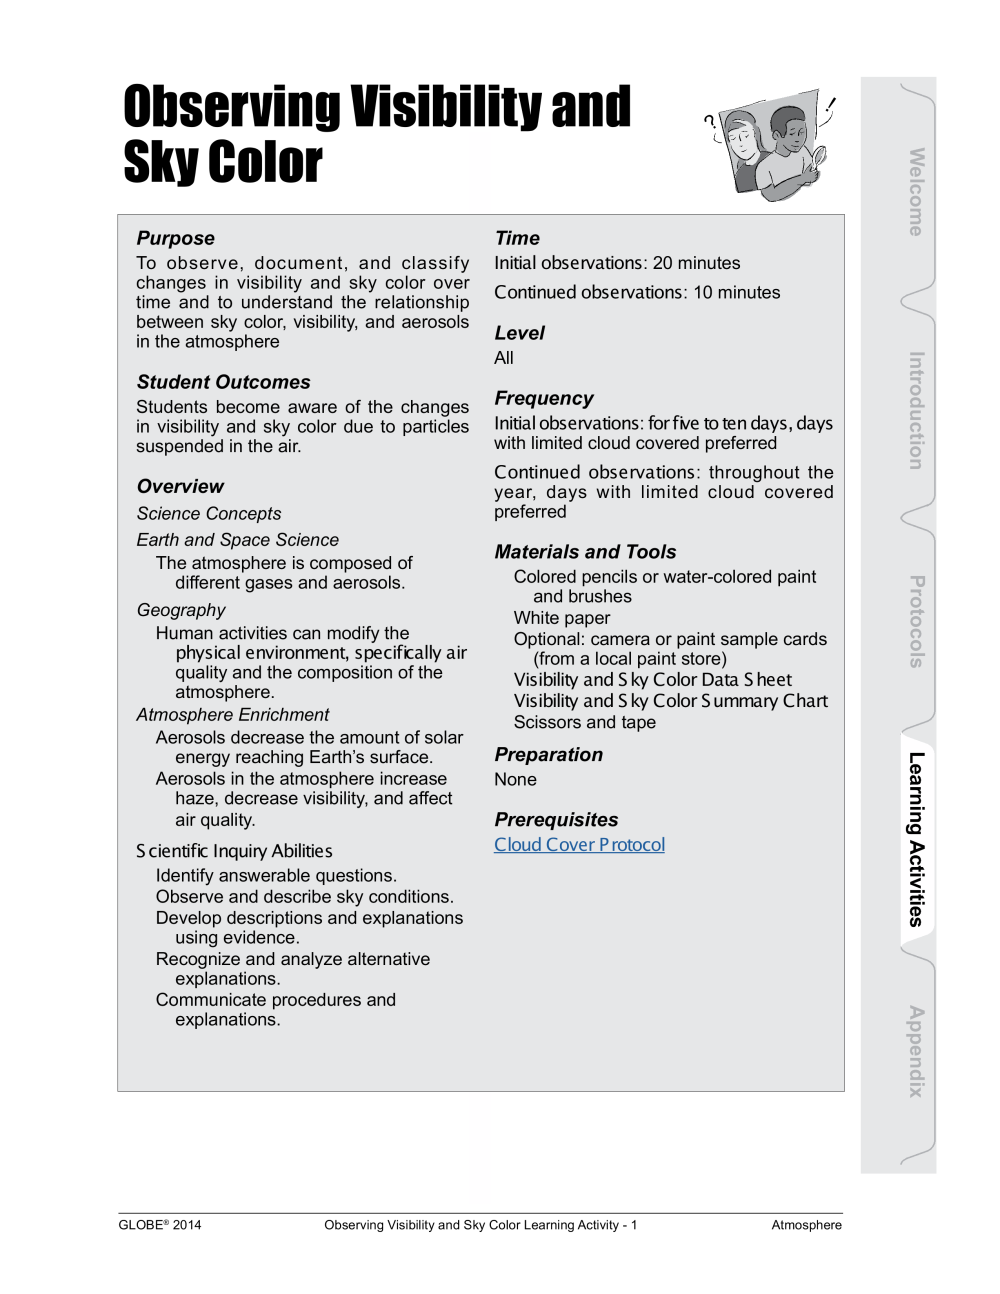 Learning Activities preview for Observing Visibility and Sky Color